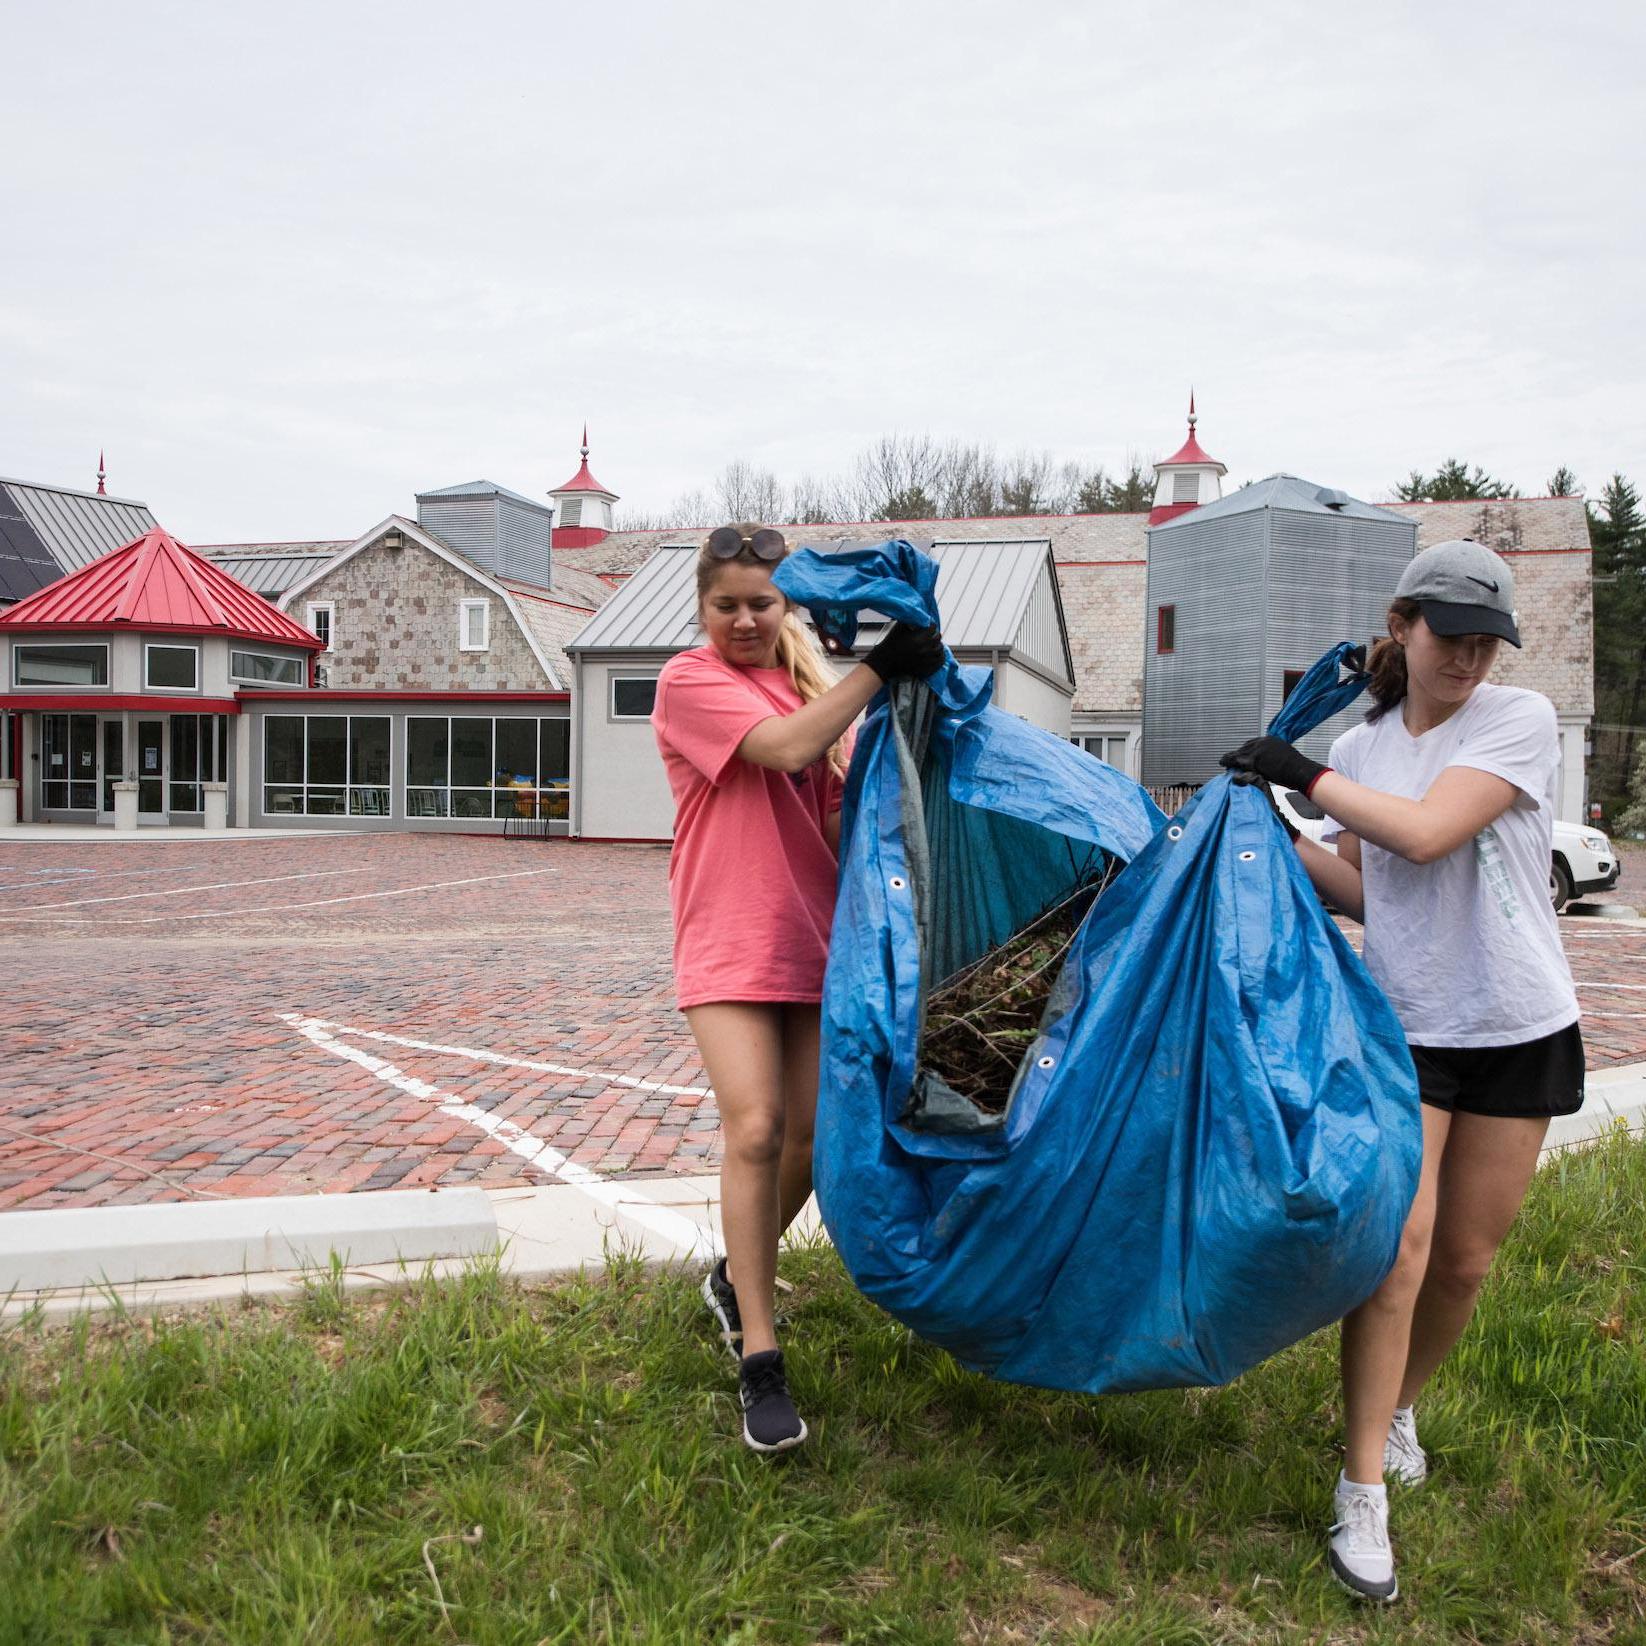 Two students carrying sticks and other debris on a tarp